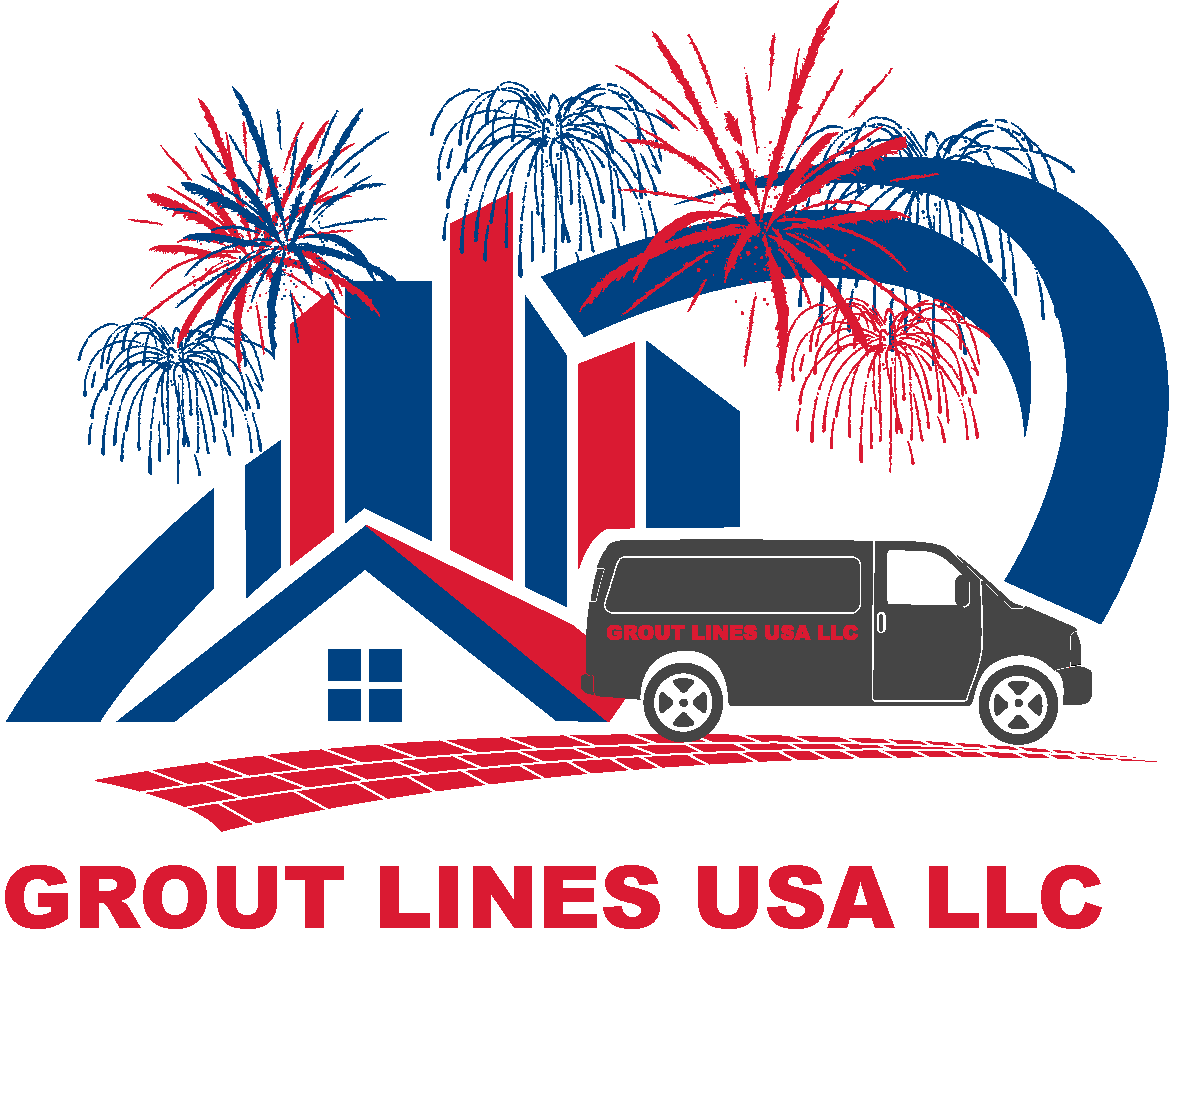 Grout Lines USA LLC